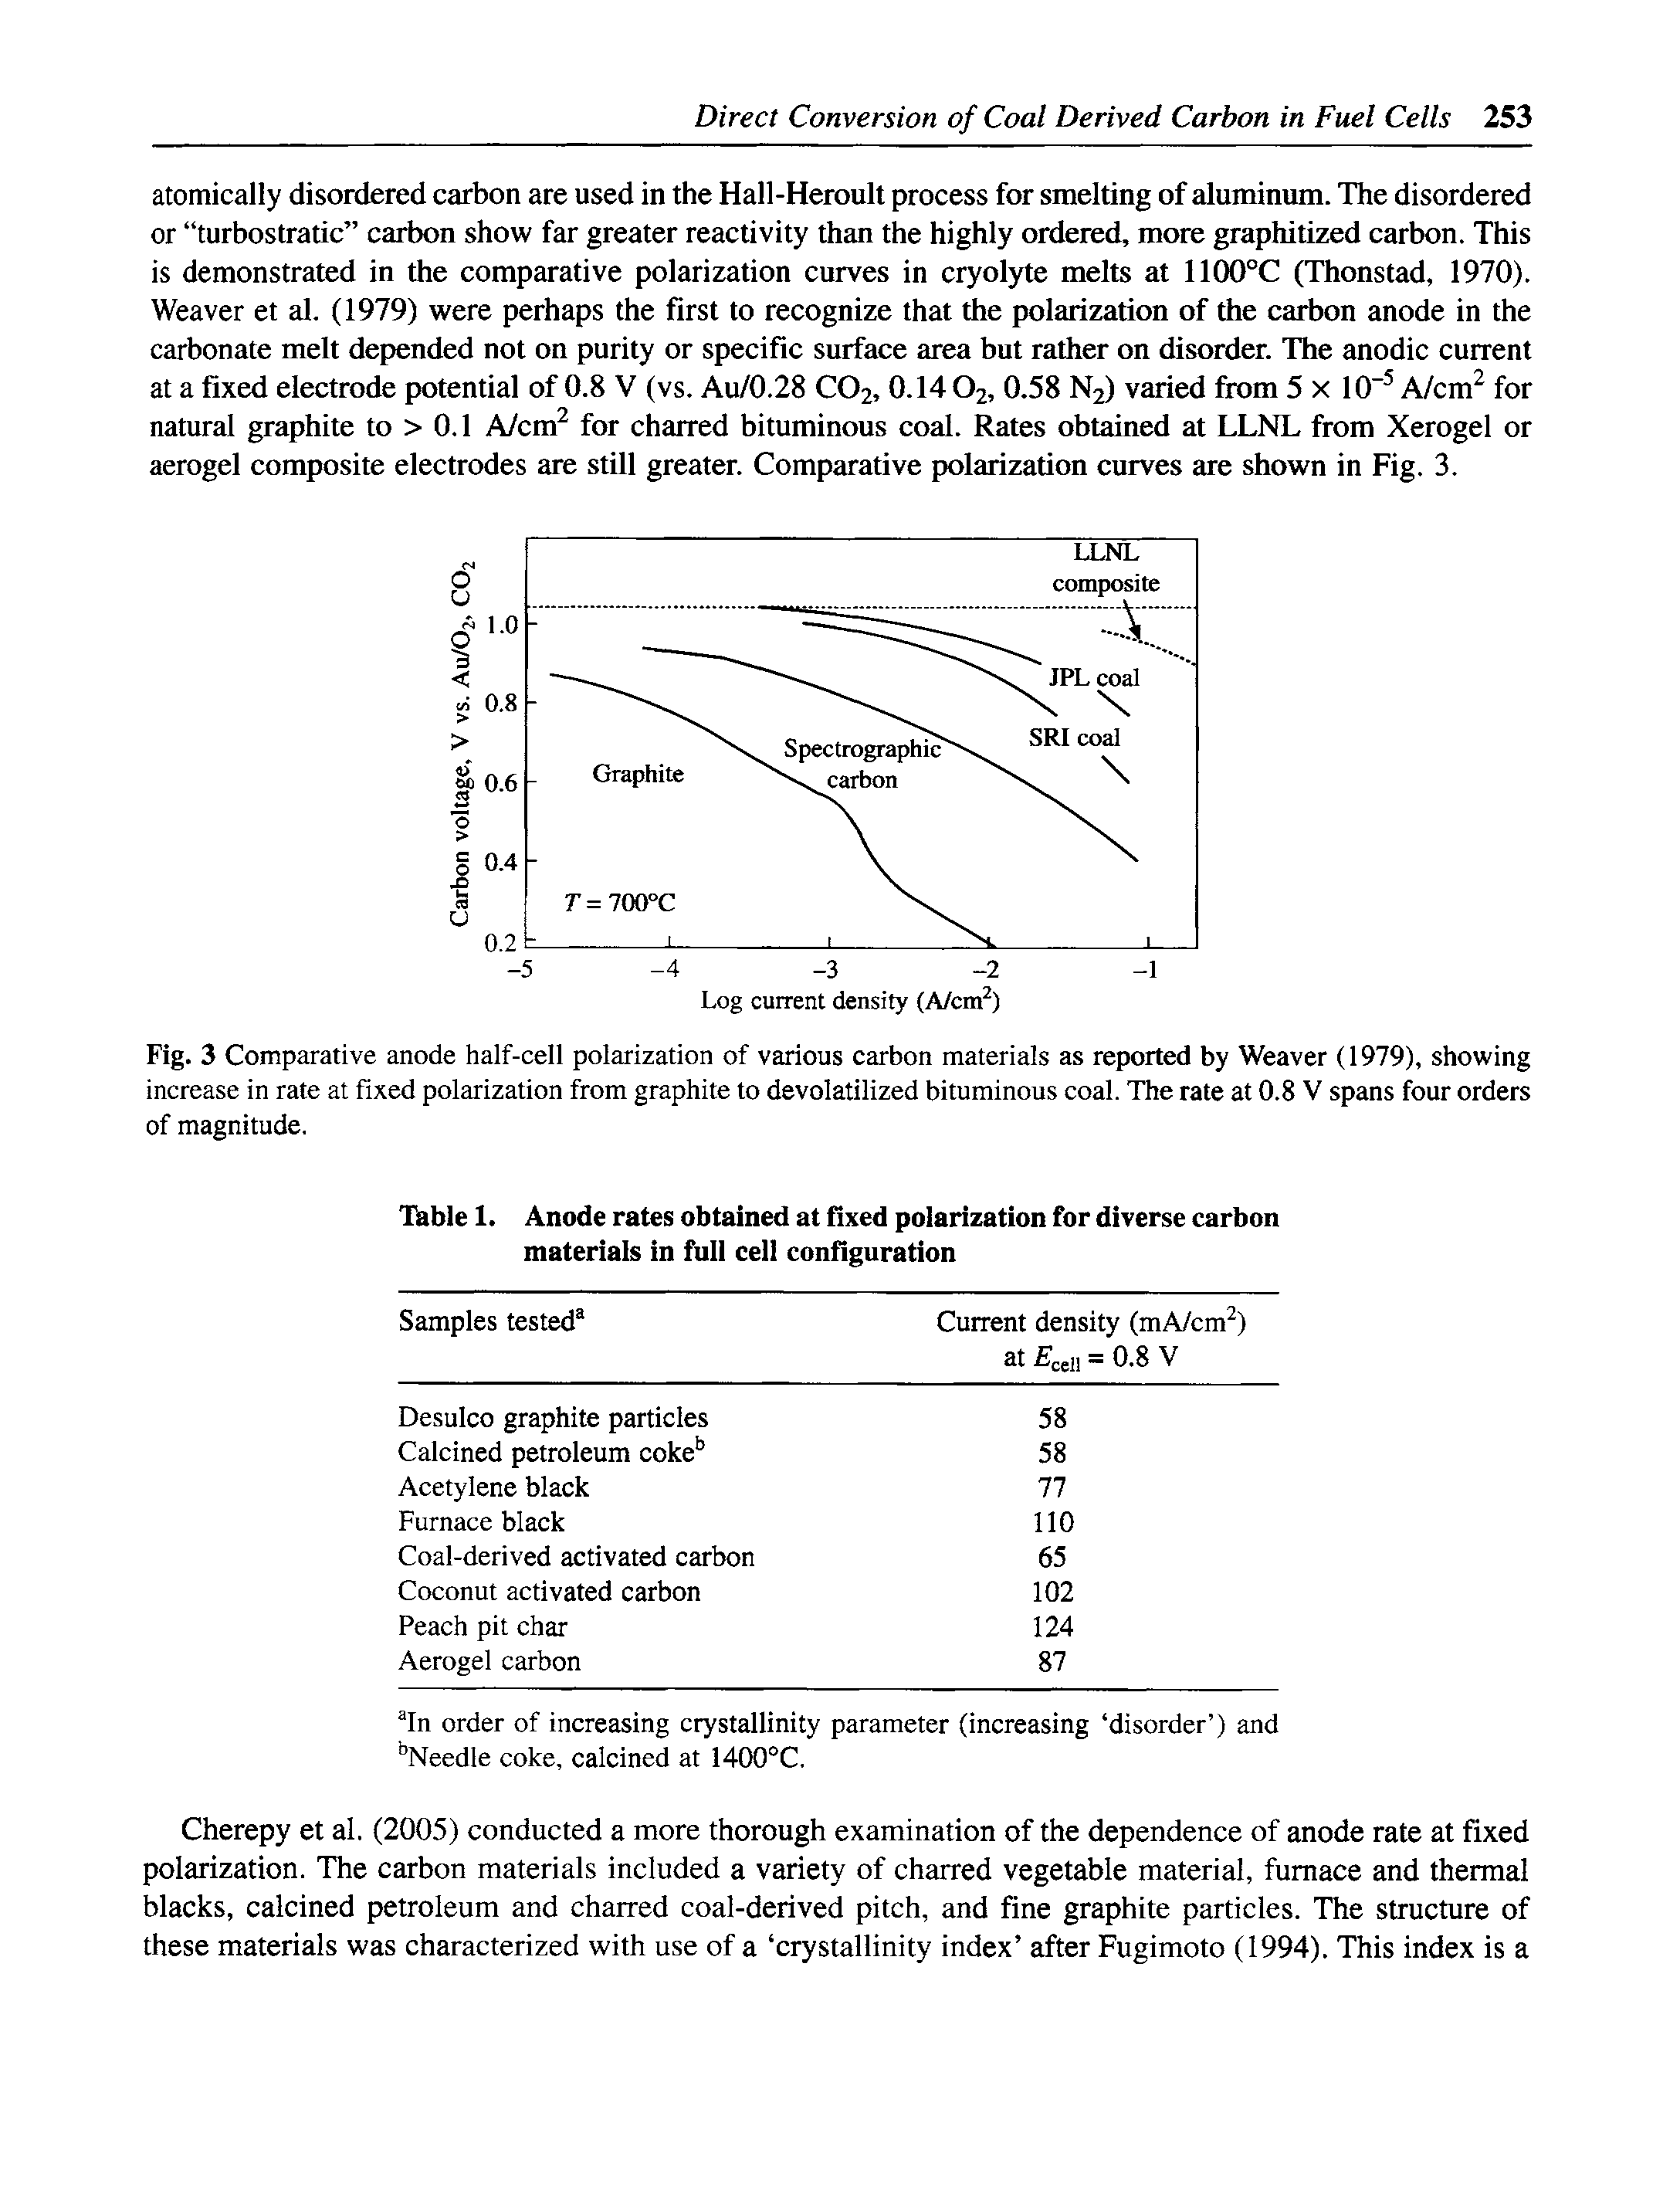 Fig. 3 Comparative anode half-cell polarization of various carbon materials as reported by Weaver (1979), showing increase in rate at fixed polarization from graphite to devolatilized bituminous coal. The rate at 0.8 V spans four orders of magnitude.